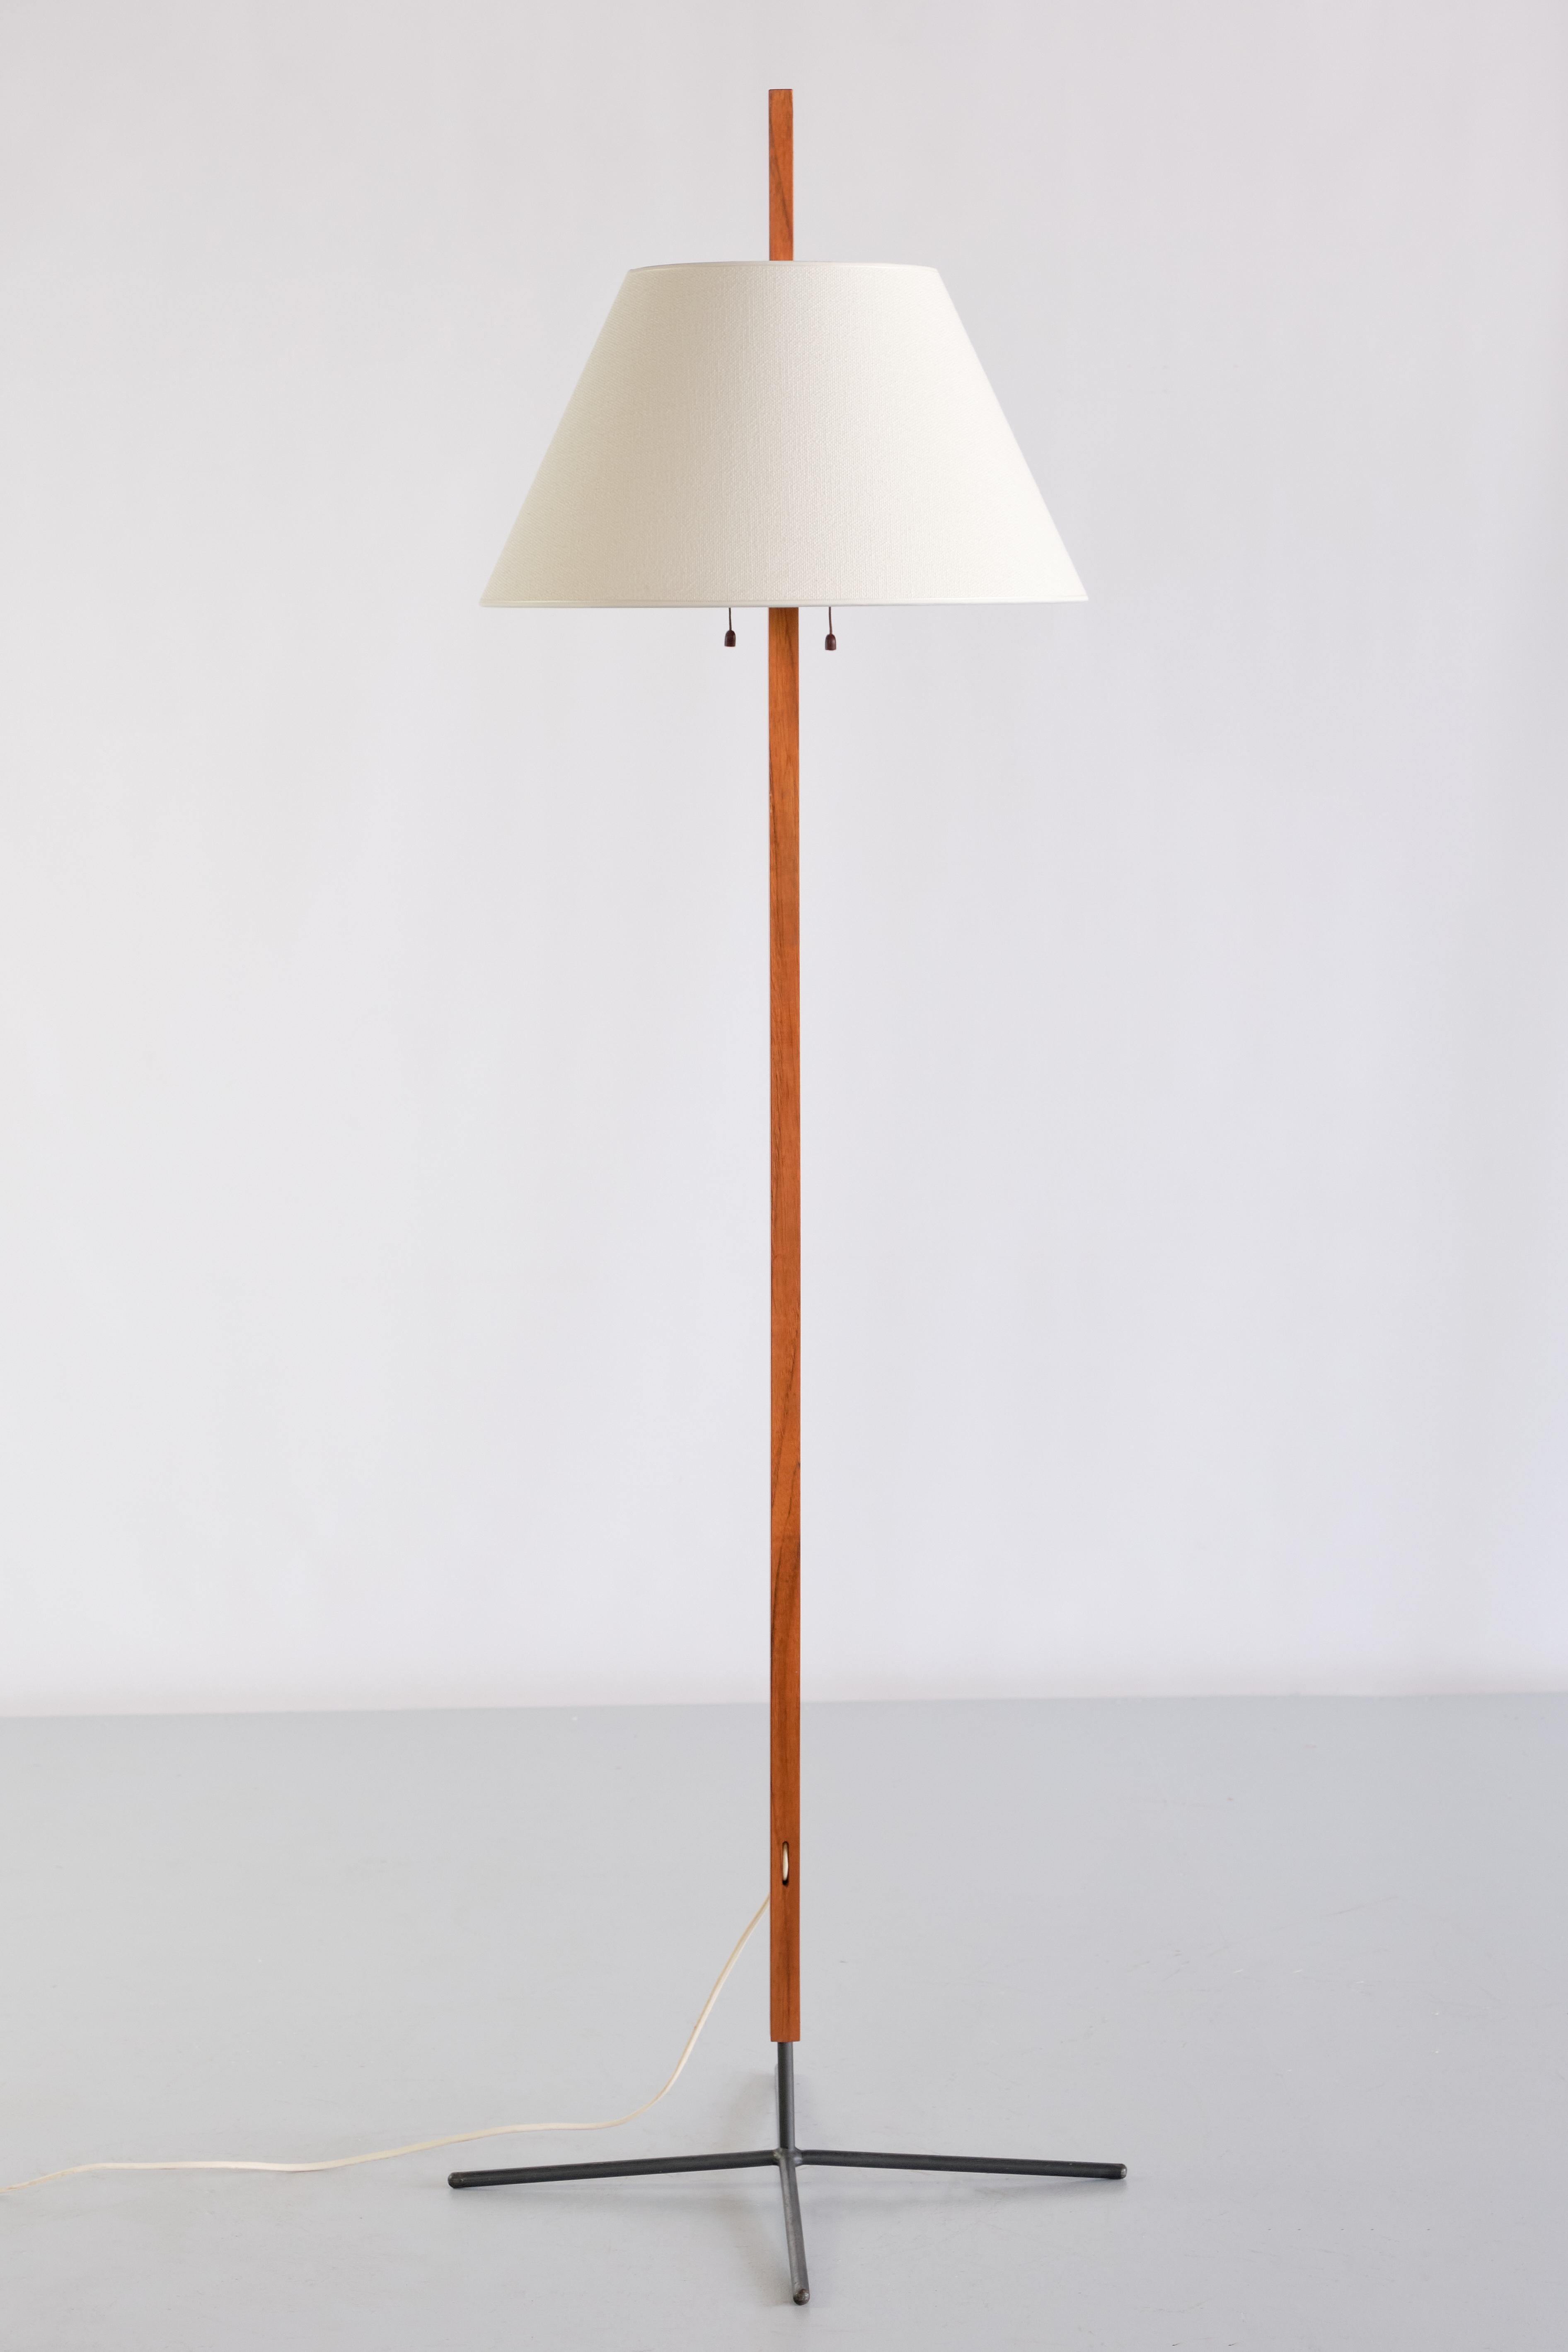 This rare floor lamp was designed by Hans Agne Jakobsson and produced by his company in Markaryd, Sweden in the early 1960s. The lamp is marked with a manufacturer's plate indicating the model number G35. The design consists of a cross legged base